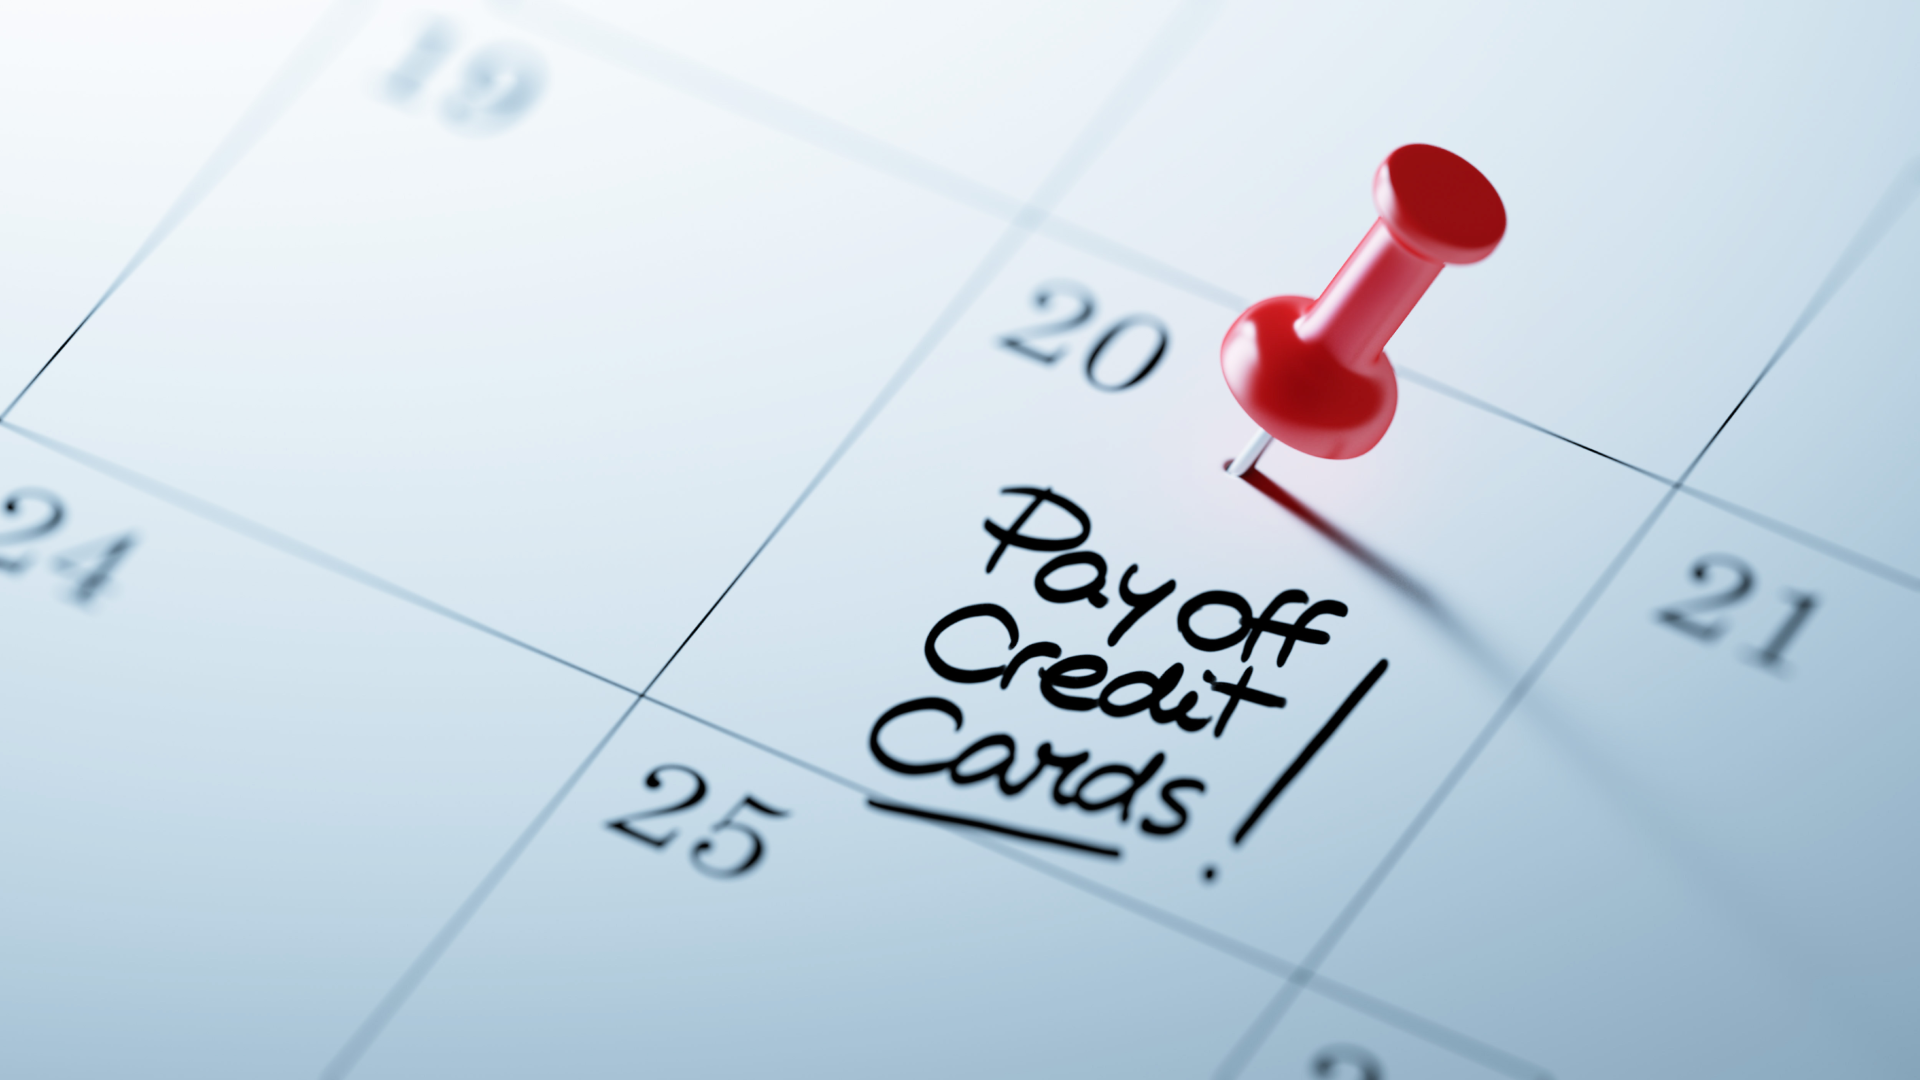 a date on the calendar displays “pay off credit cards”